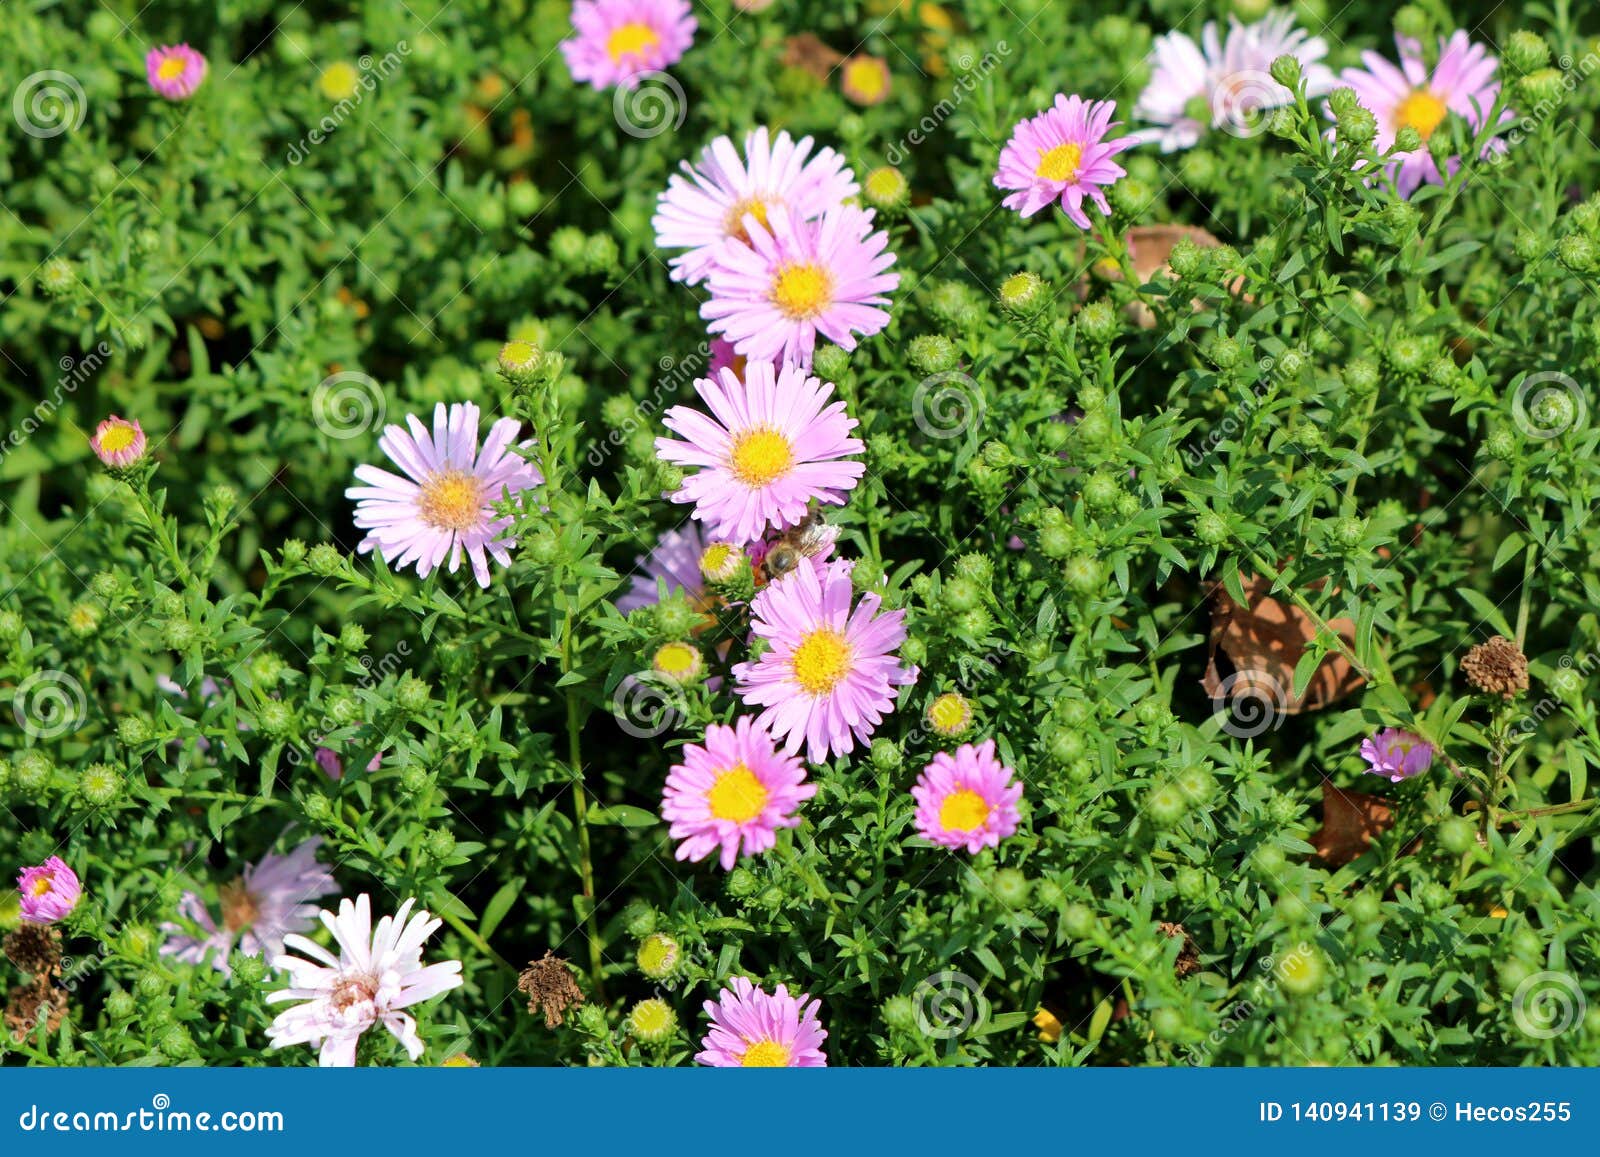 China Aster Or Callistephus Chinensis Flowering Plant Planted Like Small Bush In Local Garden With Dense Purple Flowers Surrounded Stock Image Image Of Green Plant 140941139